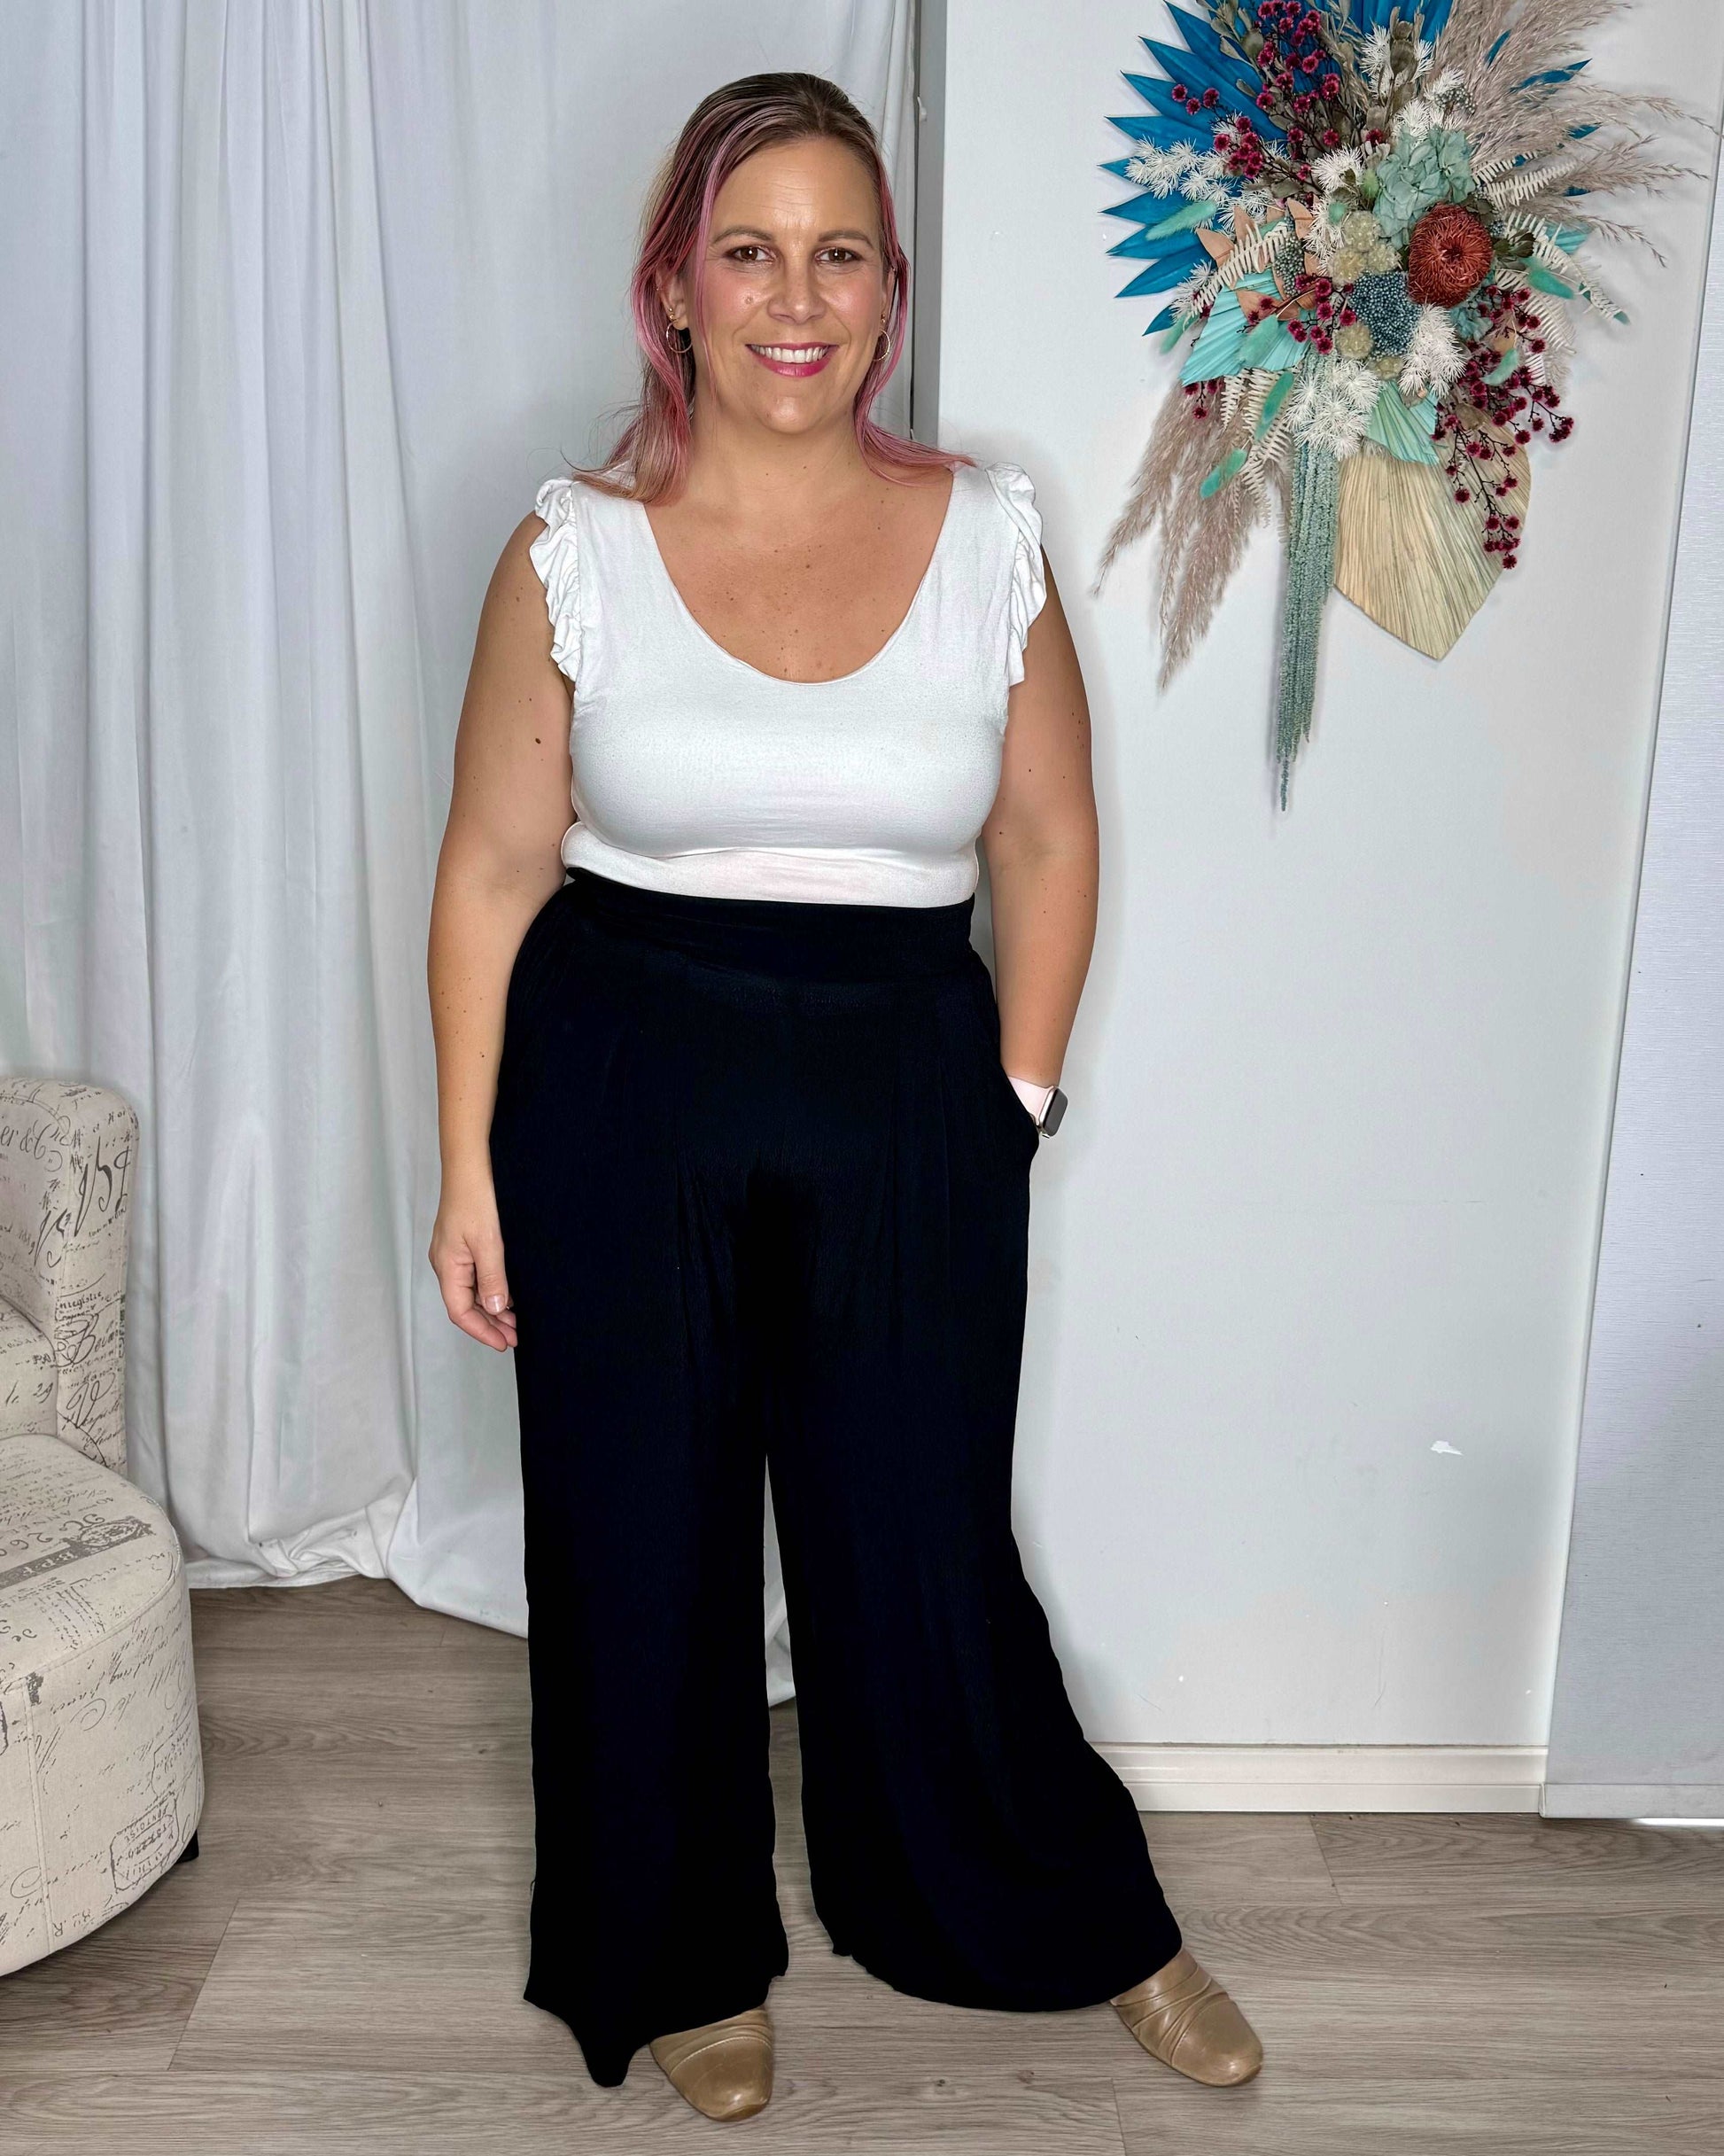 *NEW* Bonnie Pants | Bee Maddison | The Bee Maddison Bonnie Pants in black are a beautifully cut wide leg pant, elevated by the viscose fabrication. Every detail has been considered including the flatt